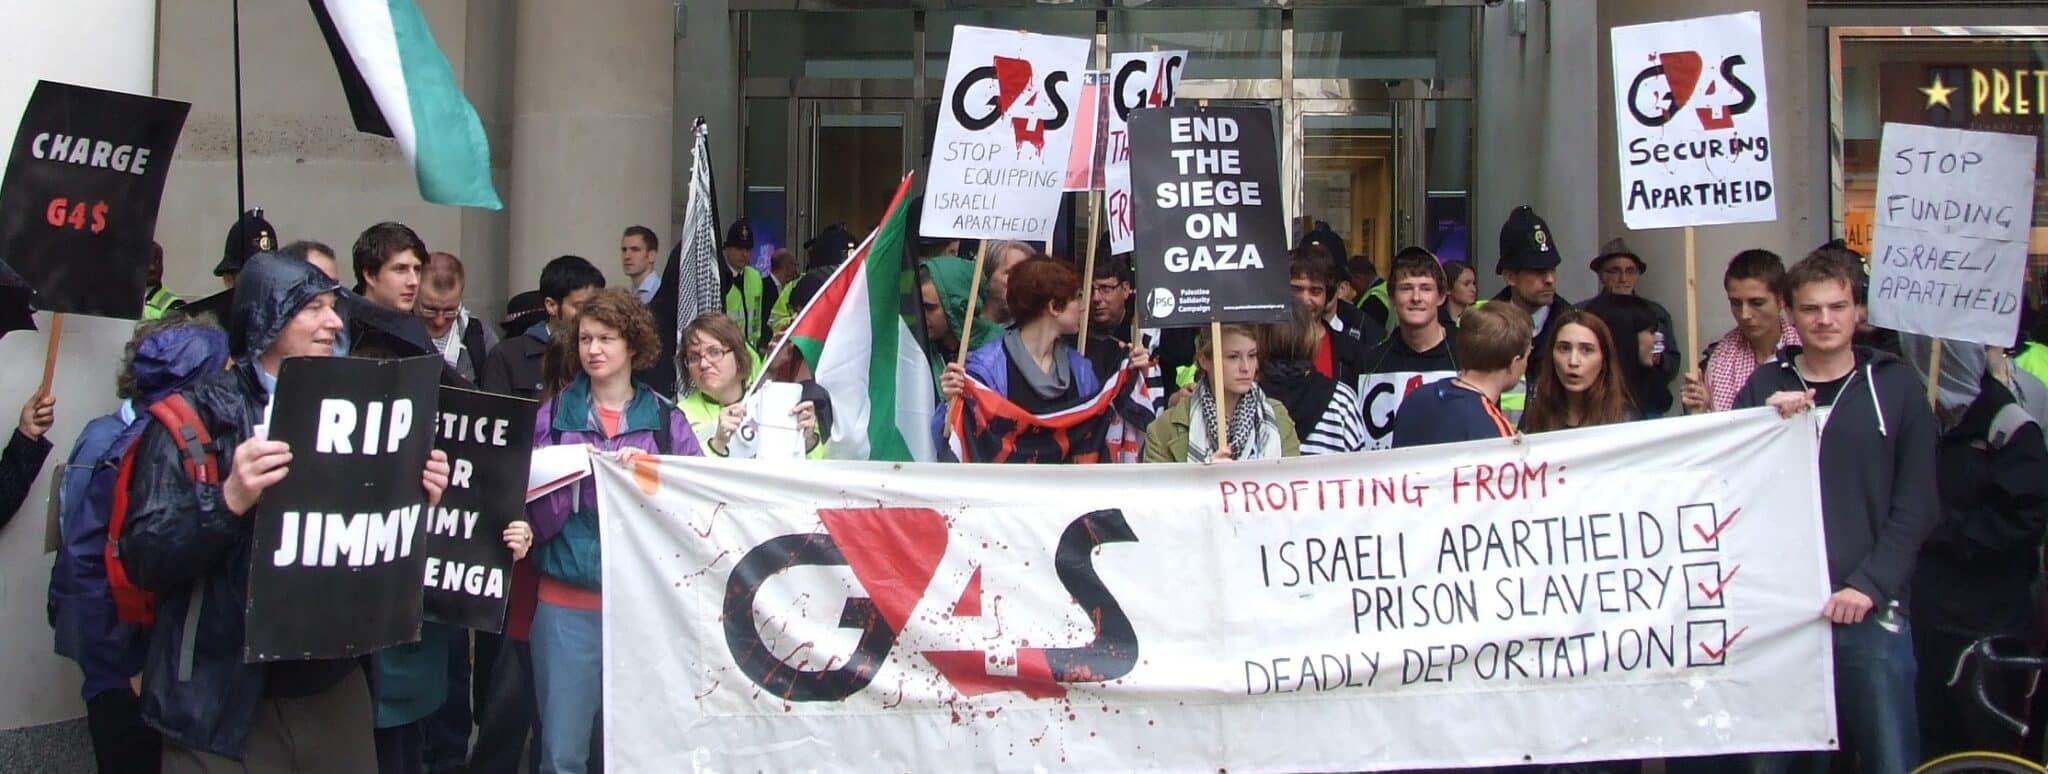 campaigners against G4S